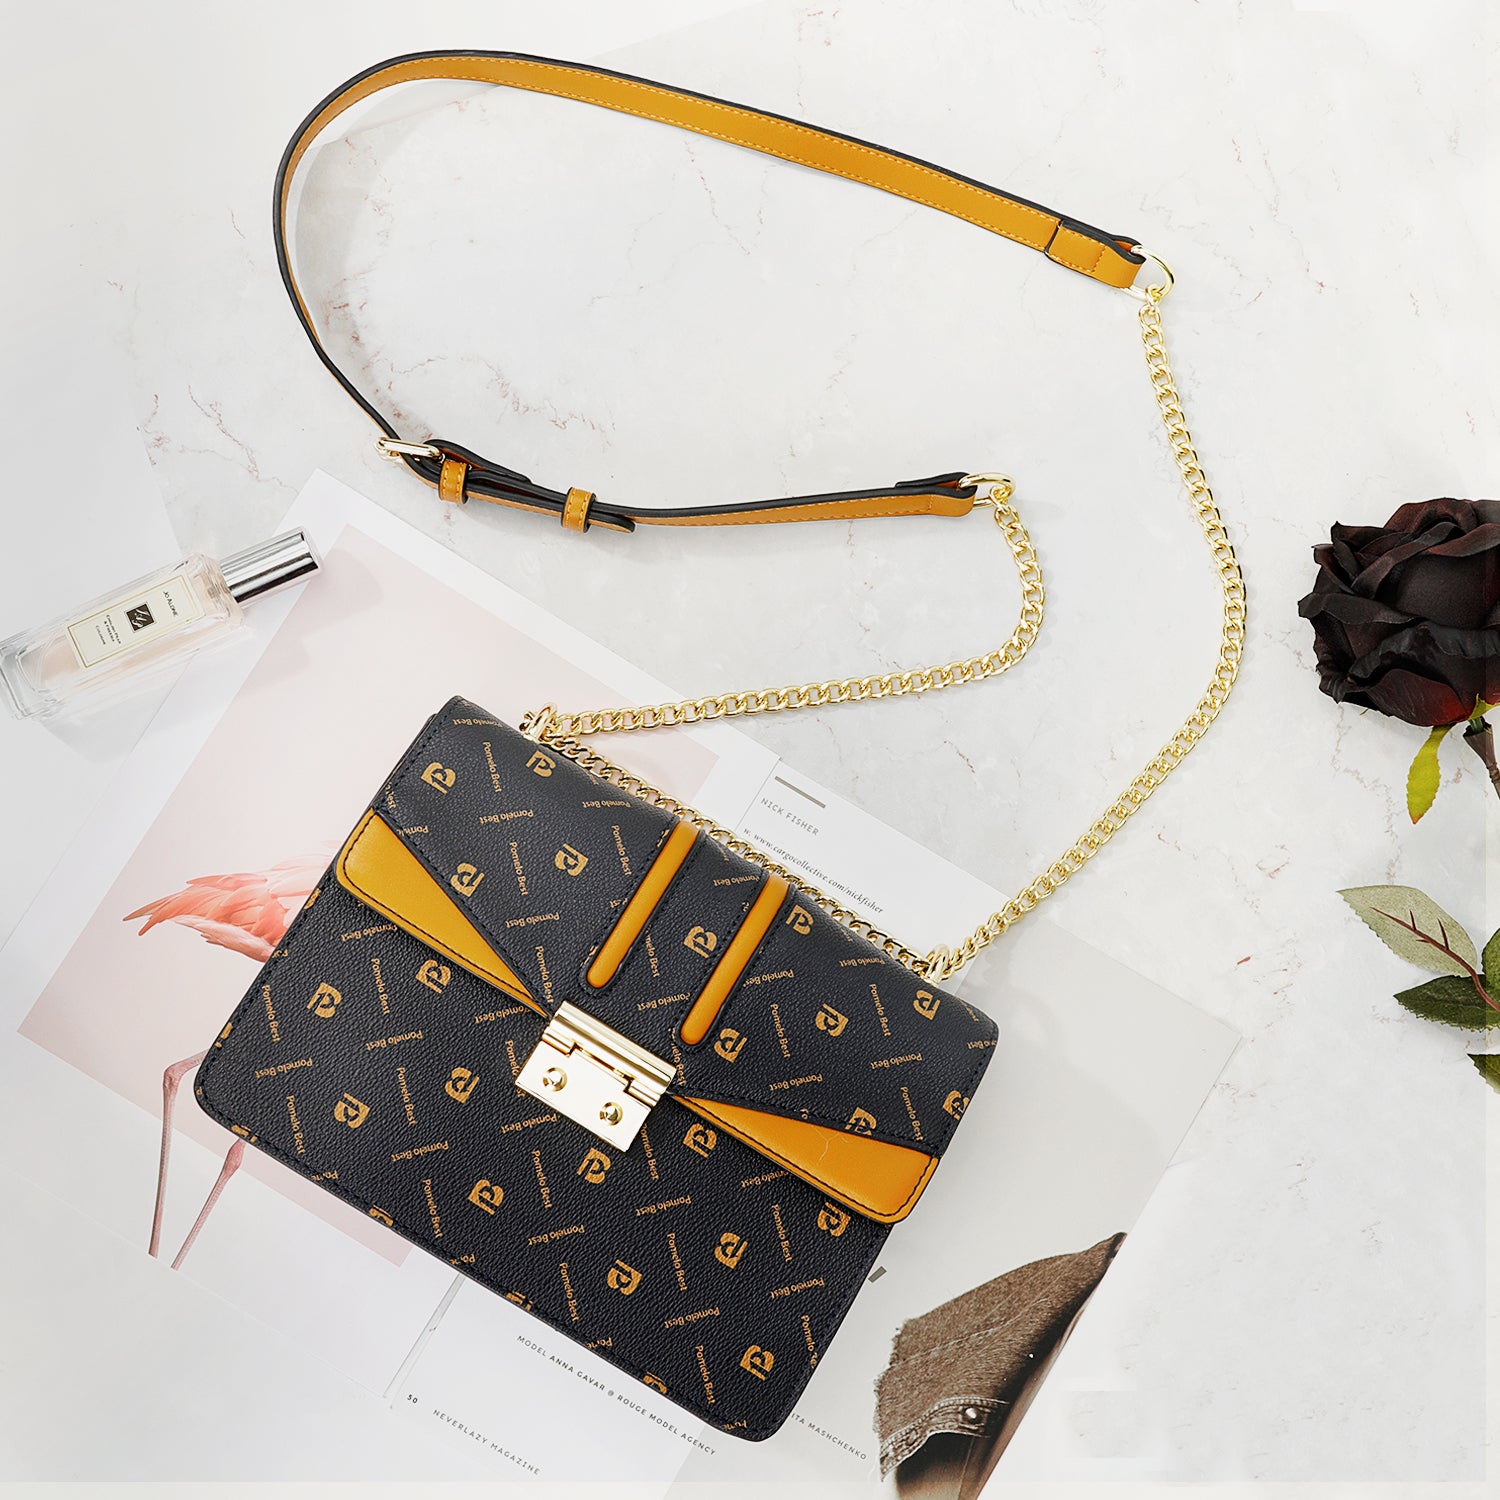 Crossbody Bags for Women Perfect for One Night Out